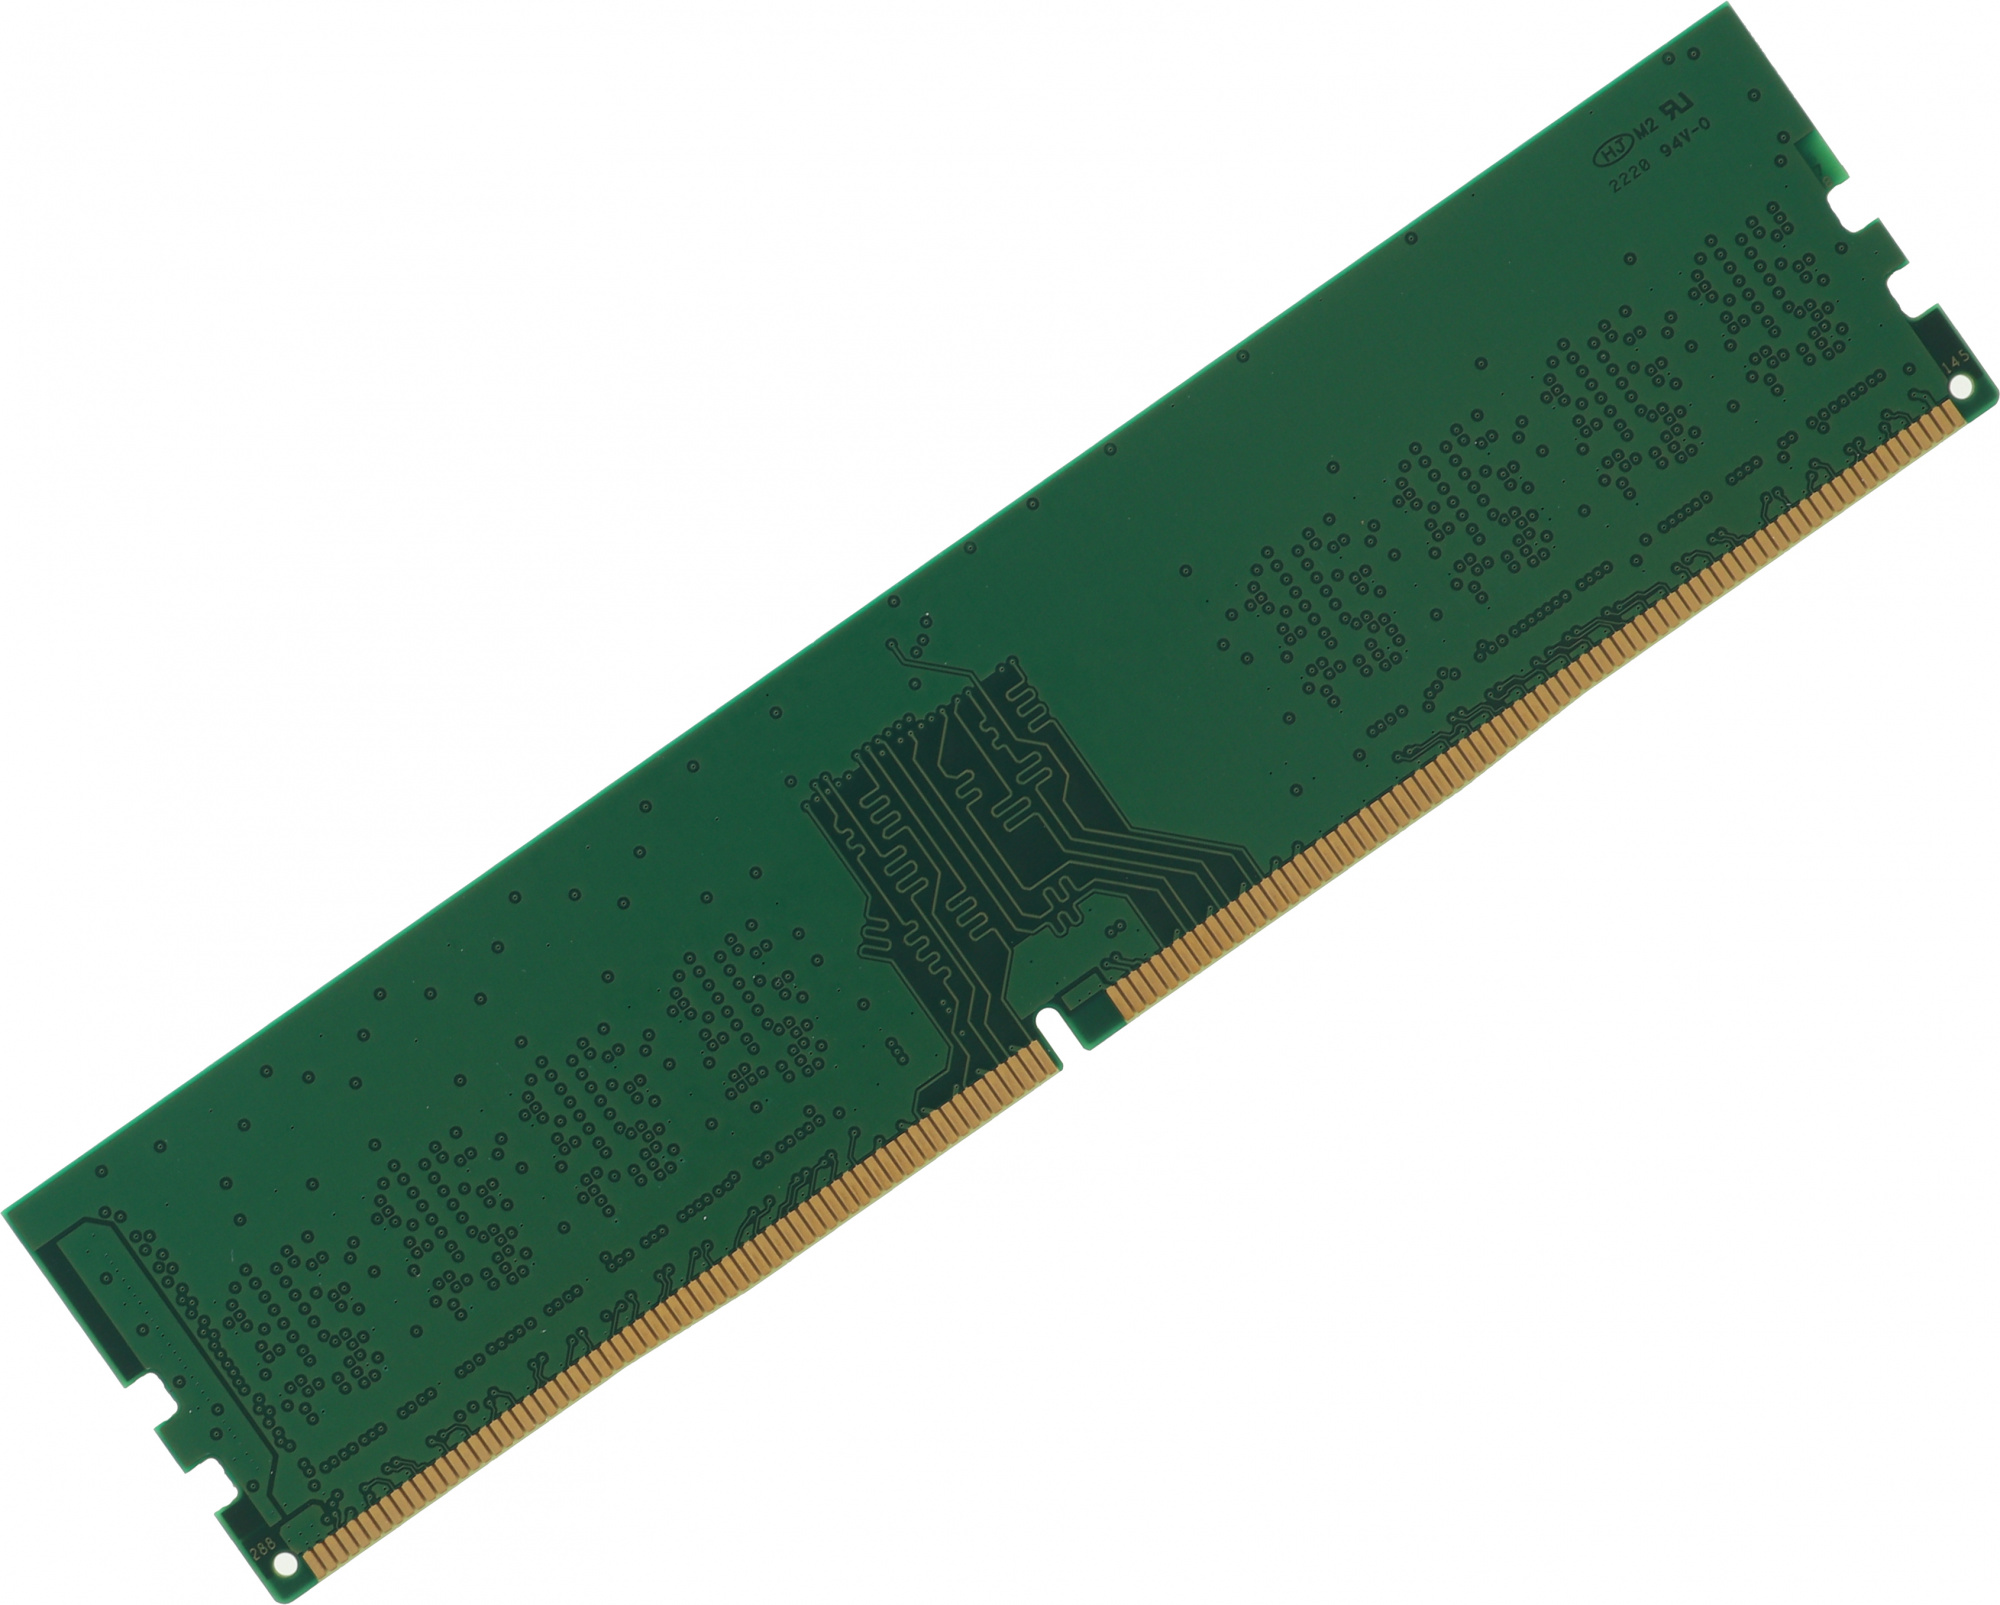   Digma DDR4 - 16 2666, DIMM, DGMAD42666016S  Ret